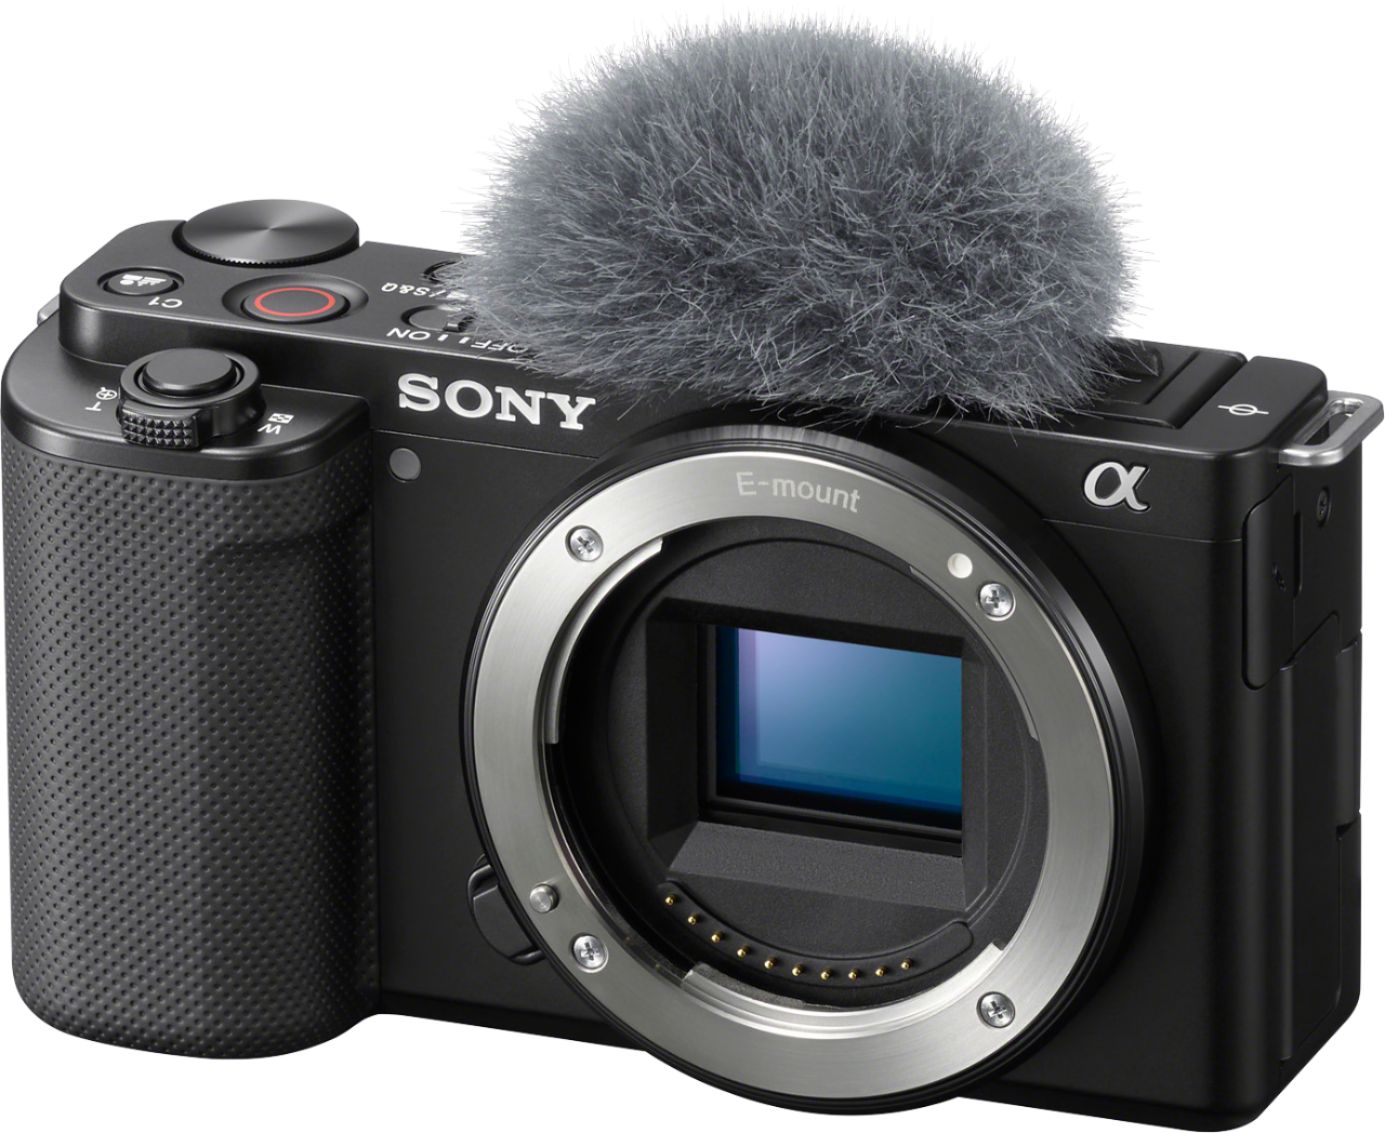 Angle View: Sony a ZV-E10 - Digital camera - mirrorless - 24.2 MP - APS-C - 4K / 30 fps - body only - Wireless LAN, Bluetooth - black